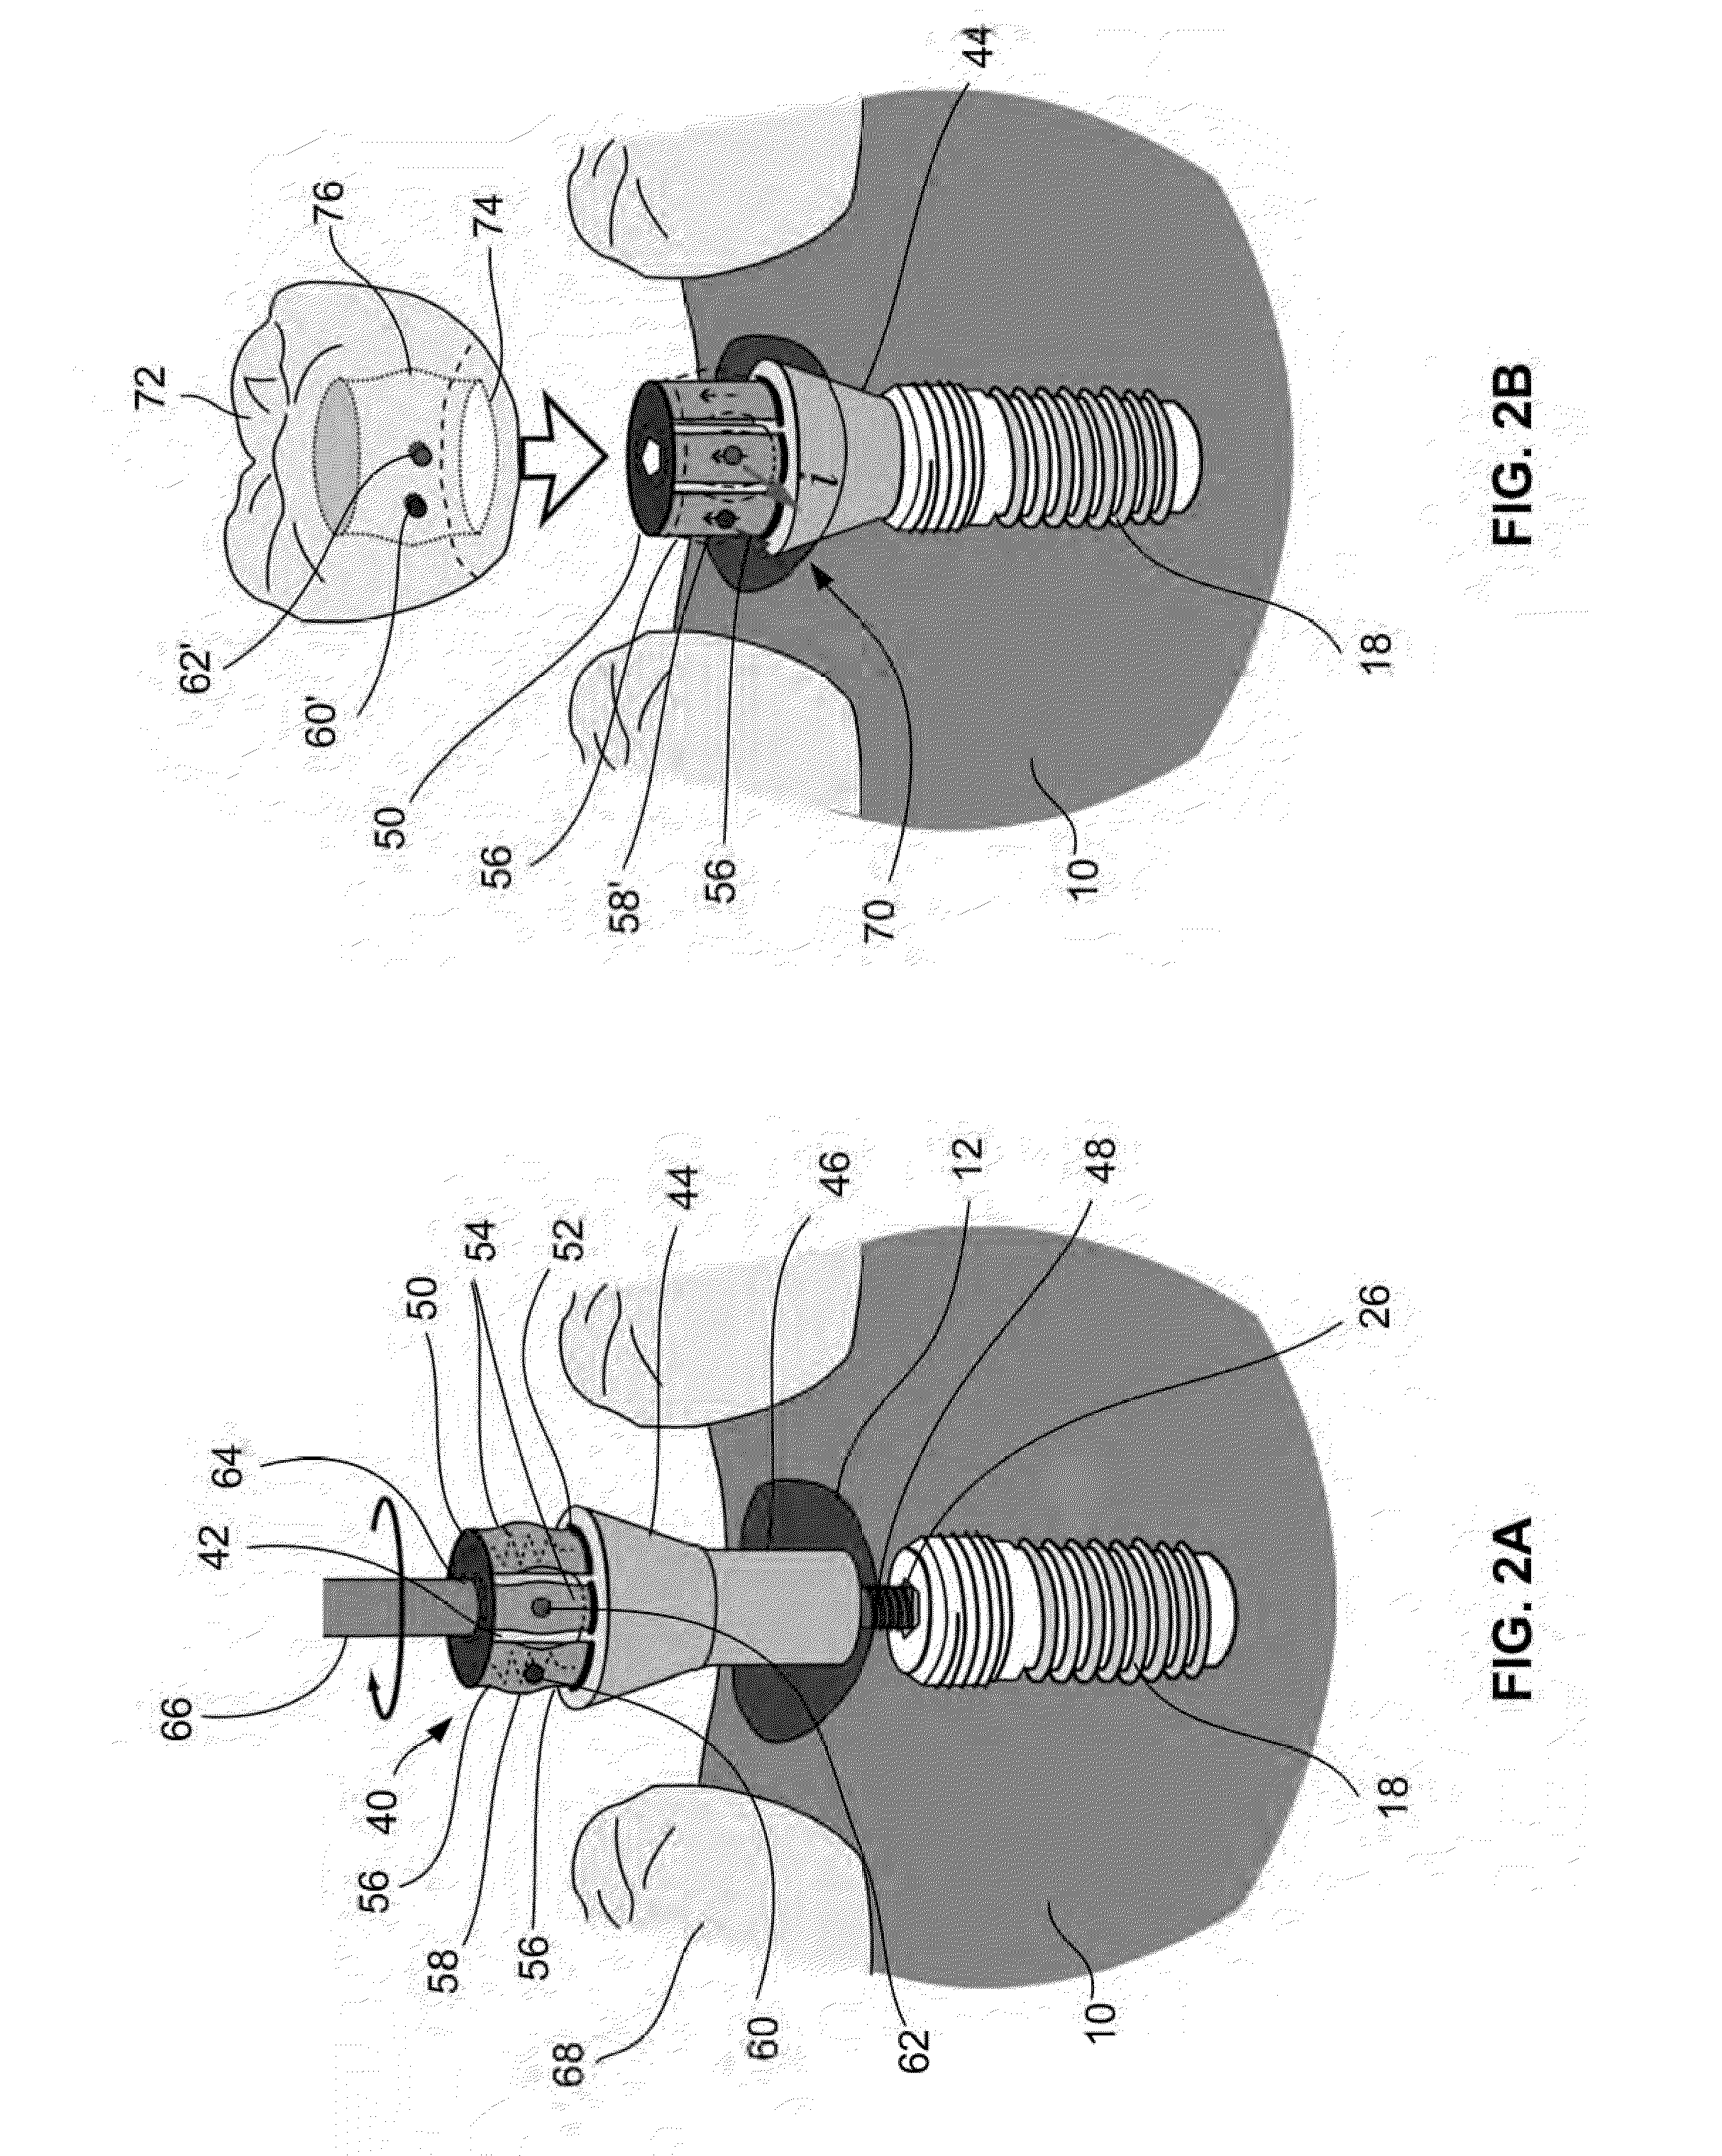 Dental prostheses devices and methods